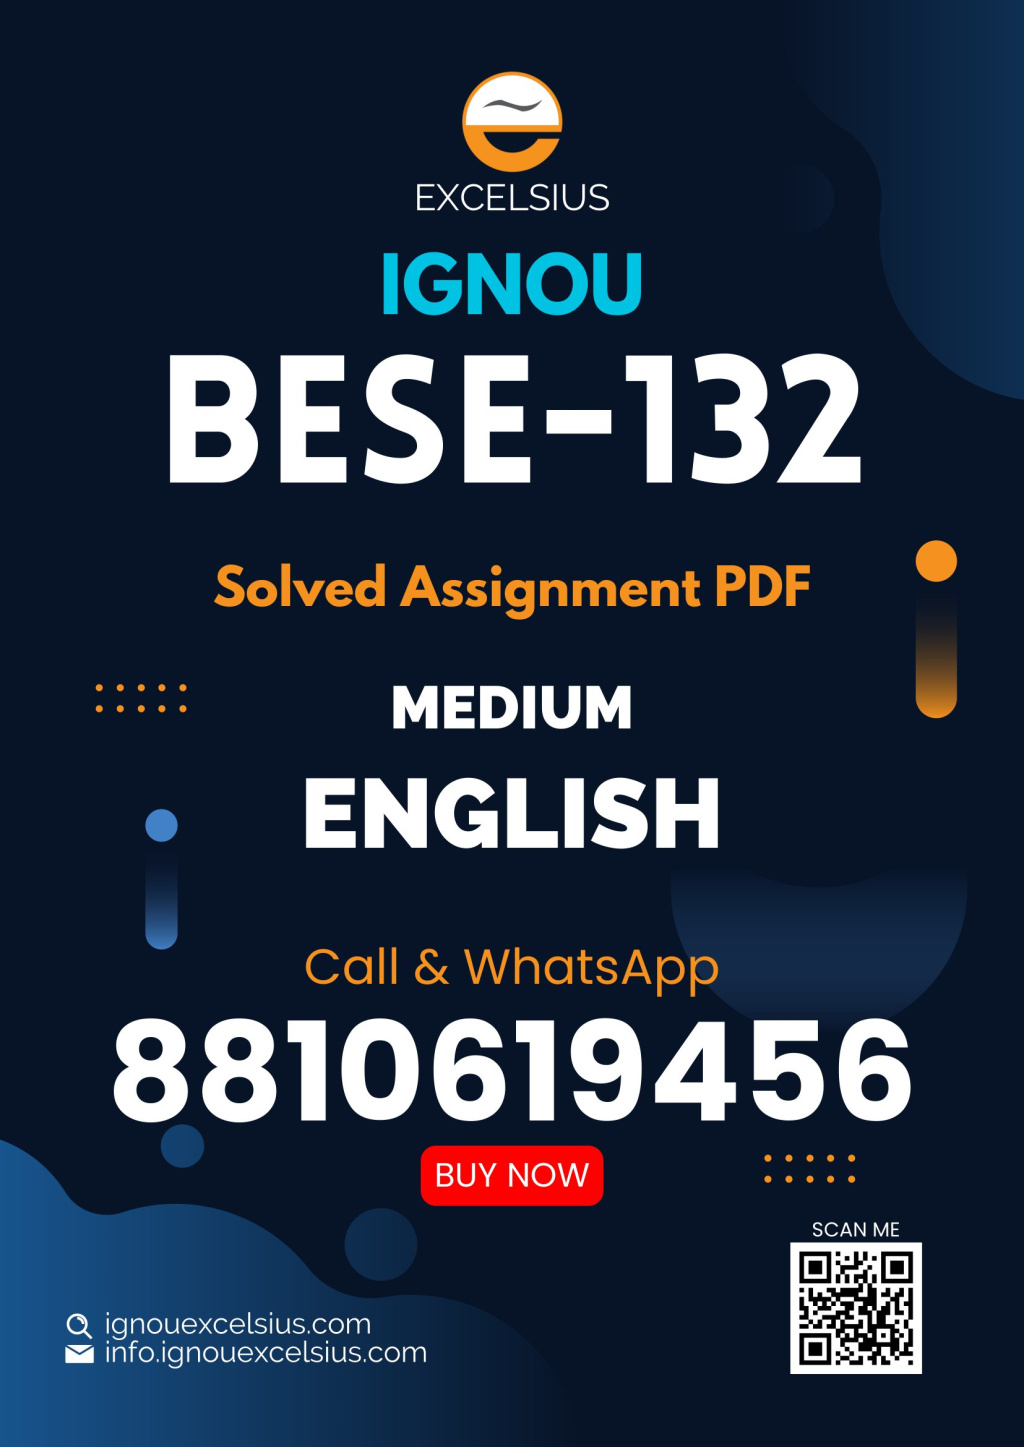 IGNOU BESE-132 - Guidance and Counselling, Latest Solved Assignment -January 2022